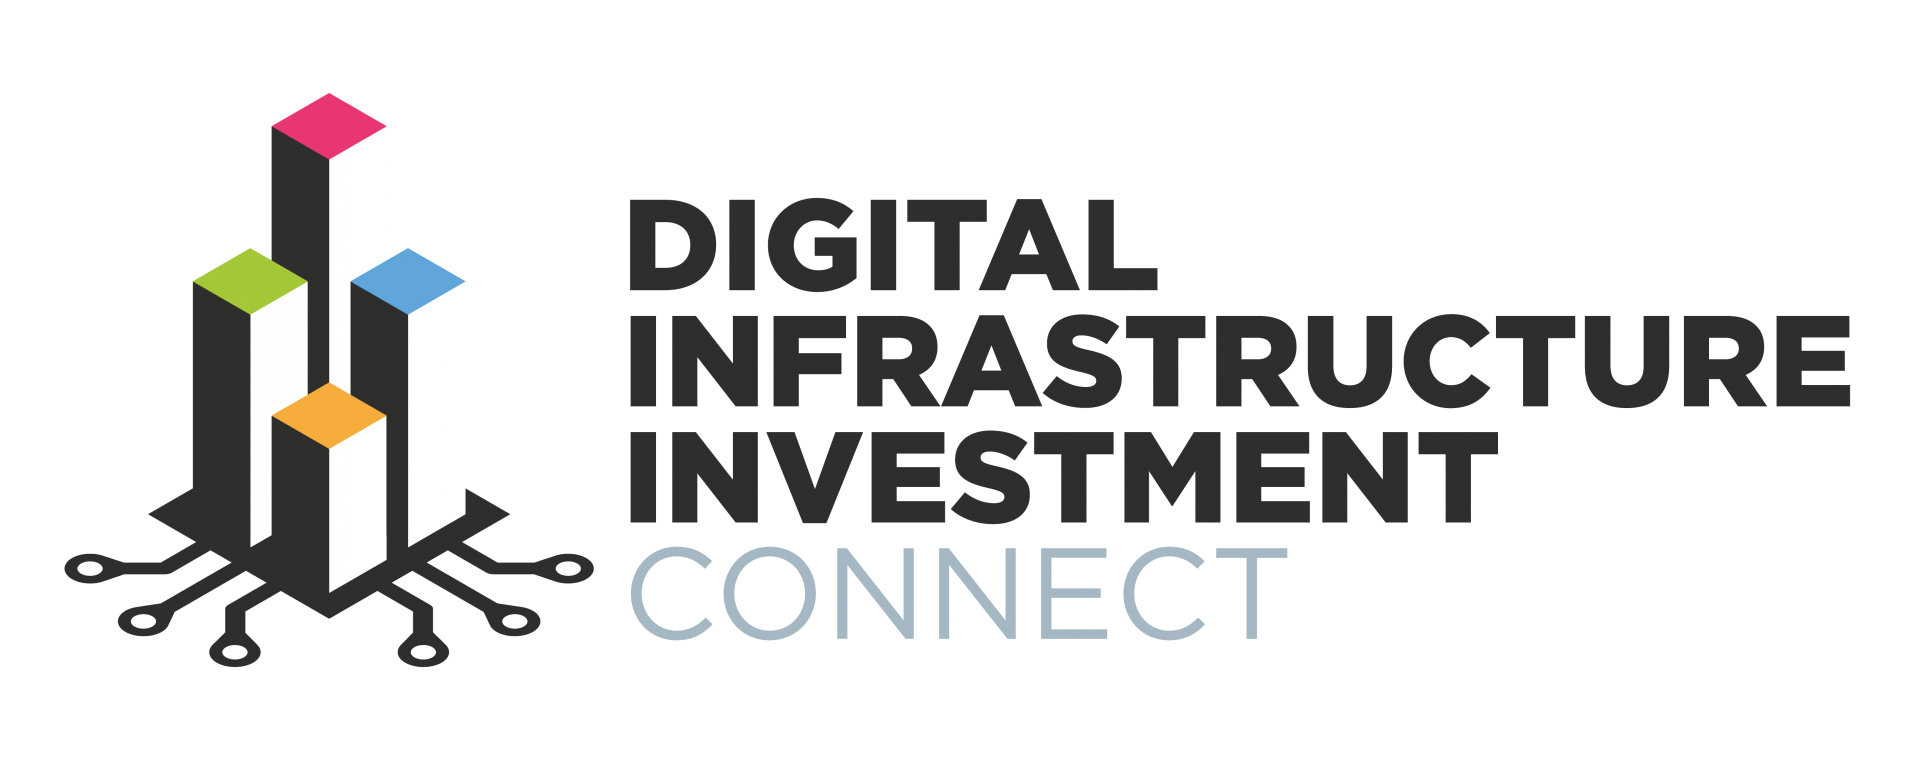 Digital Infrastructure Investment Connect